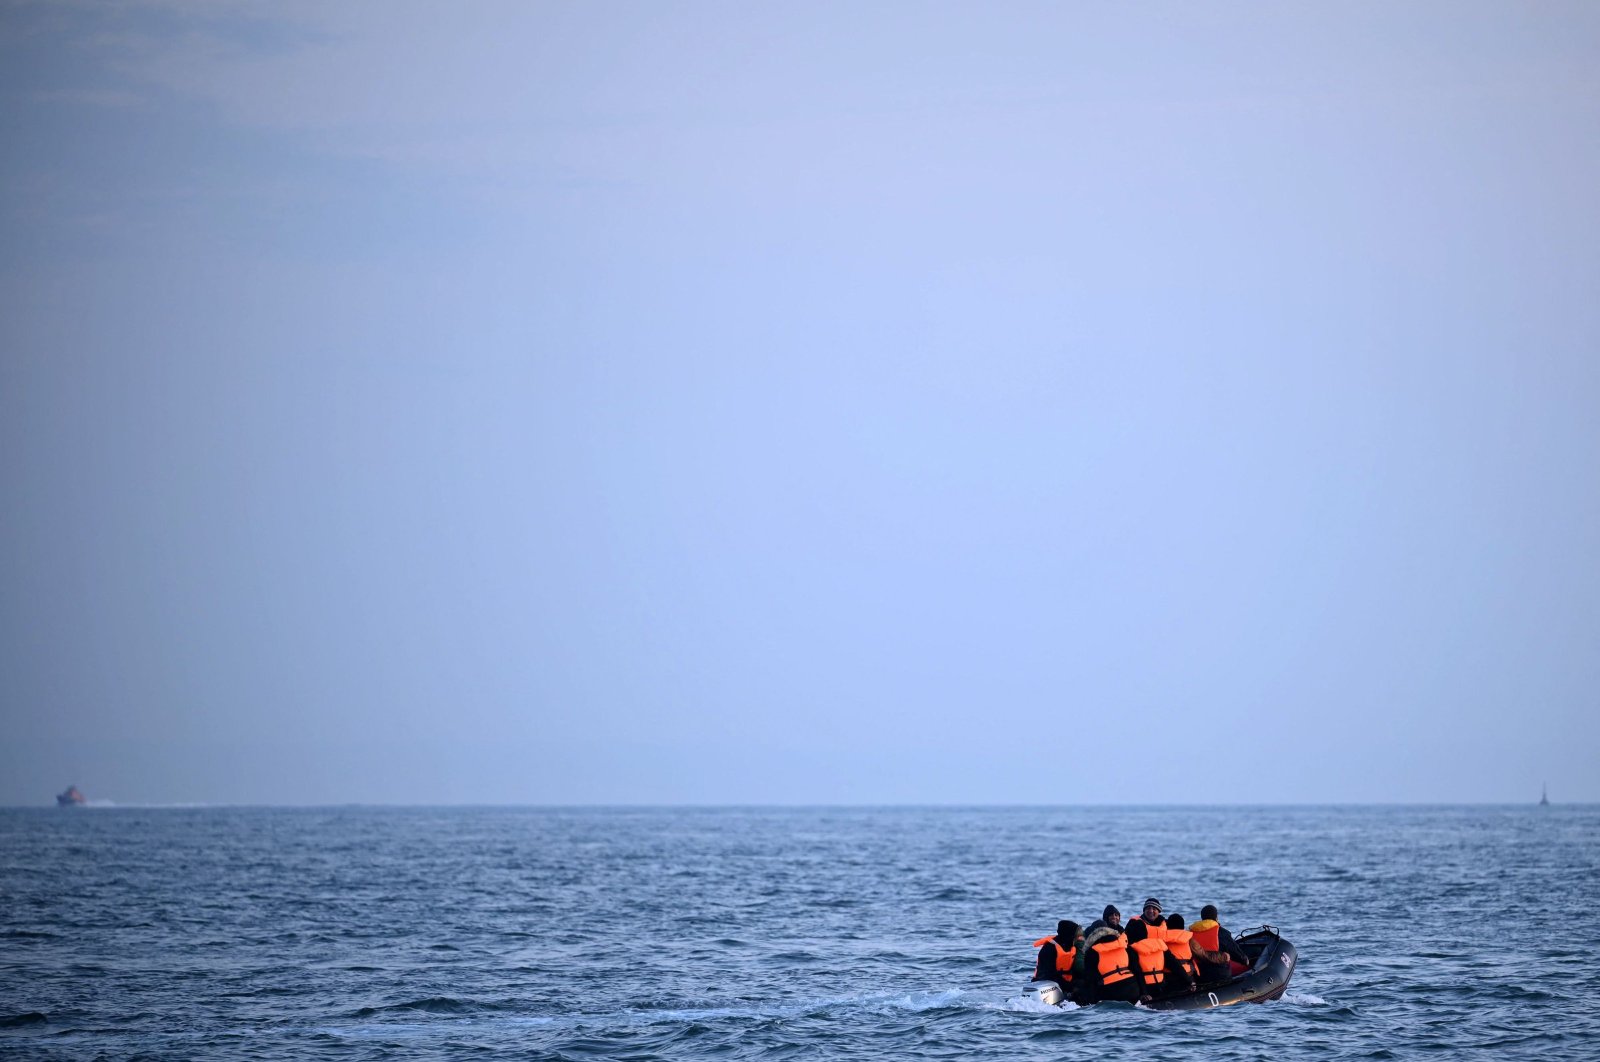 This undated photo shows a group of migrants travel in an inflatable boat across the English Channel bound for Dover, southern coast of England. (AFP Photo)